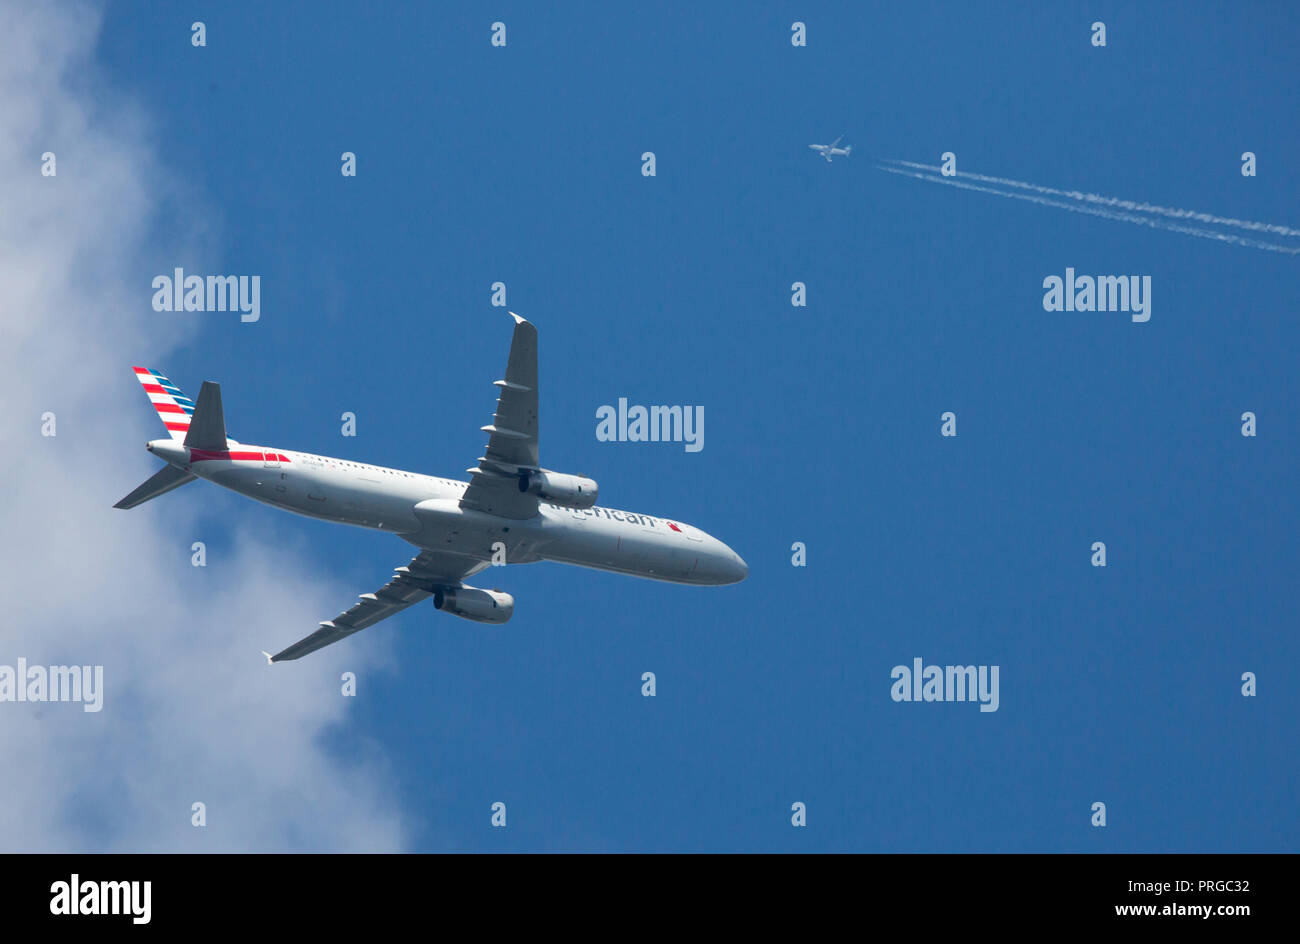 CHARLOTTE, NC (USA) - October 1, 2018:  Two commercial airliners at different altitudes occupying the same air space. Stock Photo